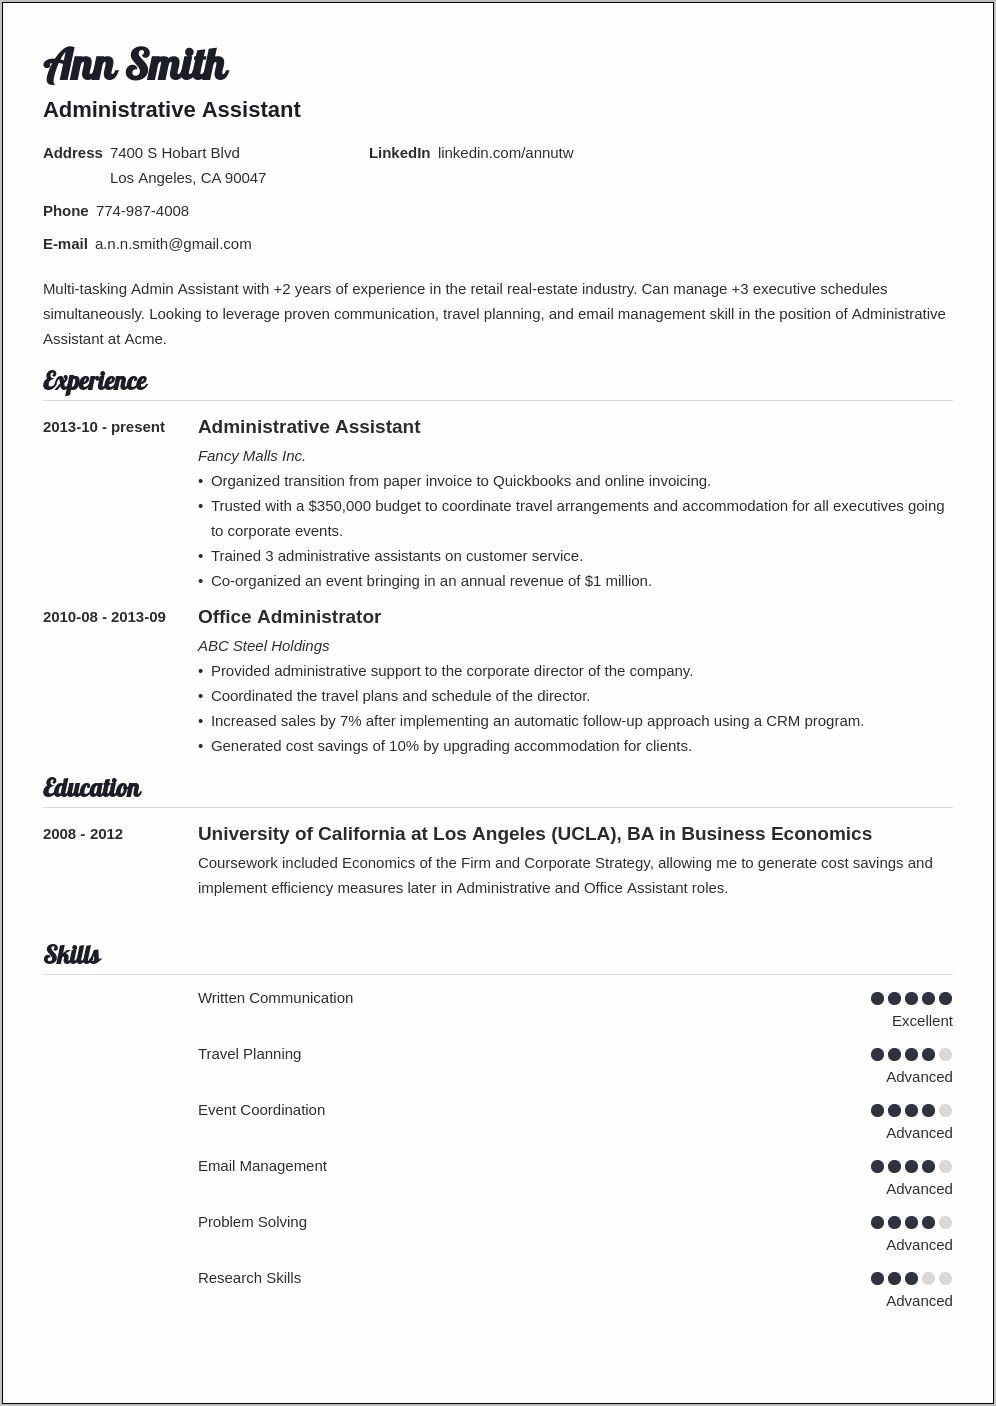 Resume Objectives For Administrative Professionals